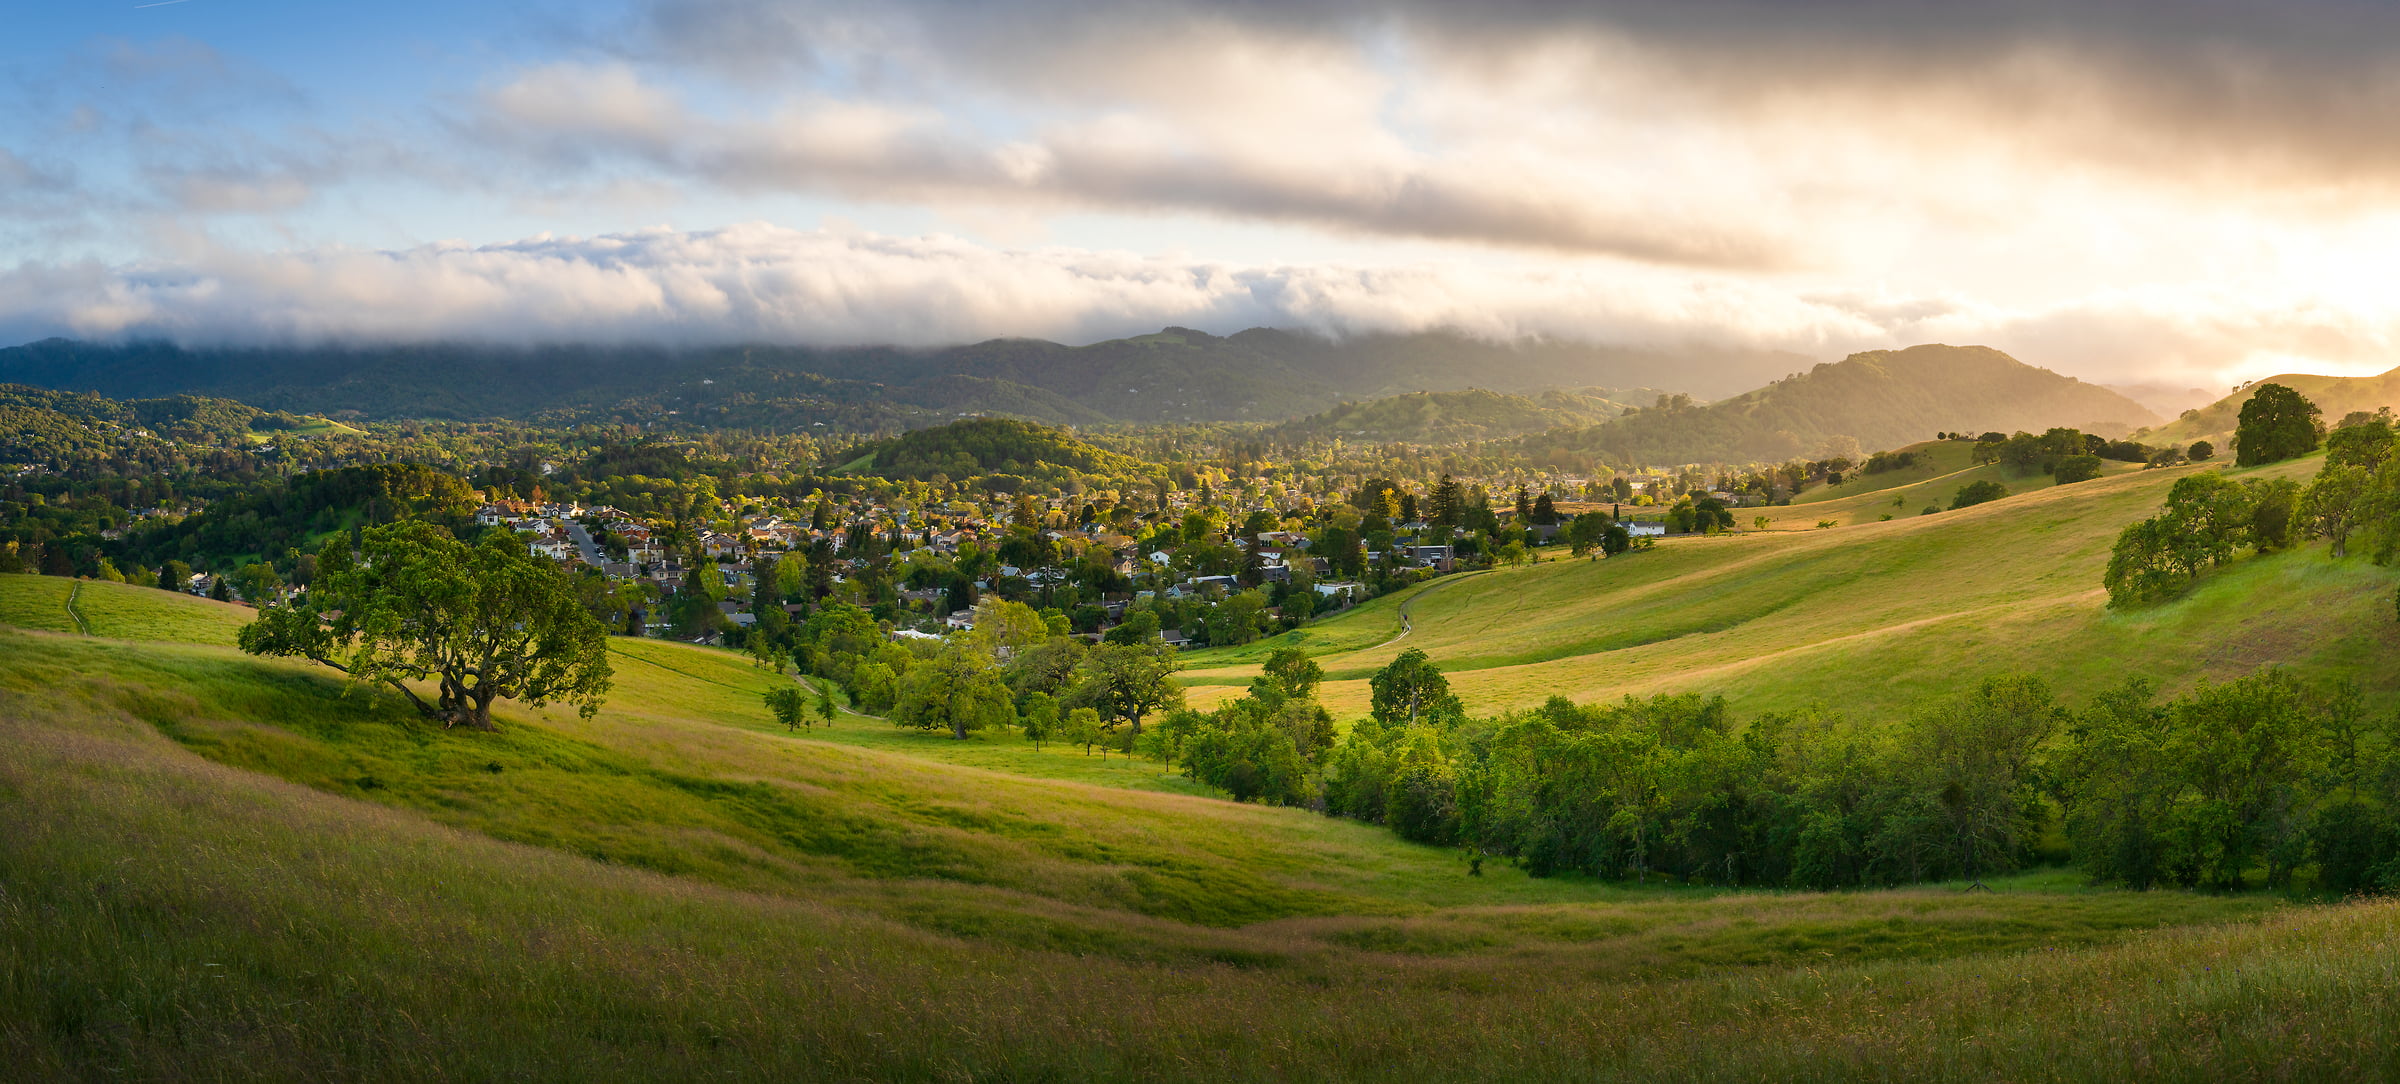 179 megapixels! A very high resolution, large-format VAST photo print of a green spring landscape with rolling hills; landscape photograph created by Jeff Lewis in Novato, California